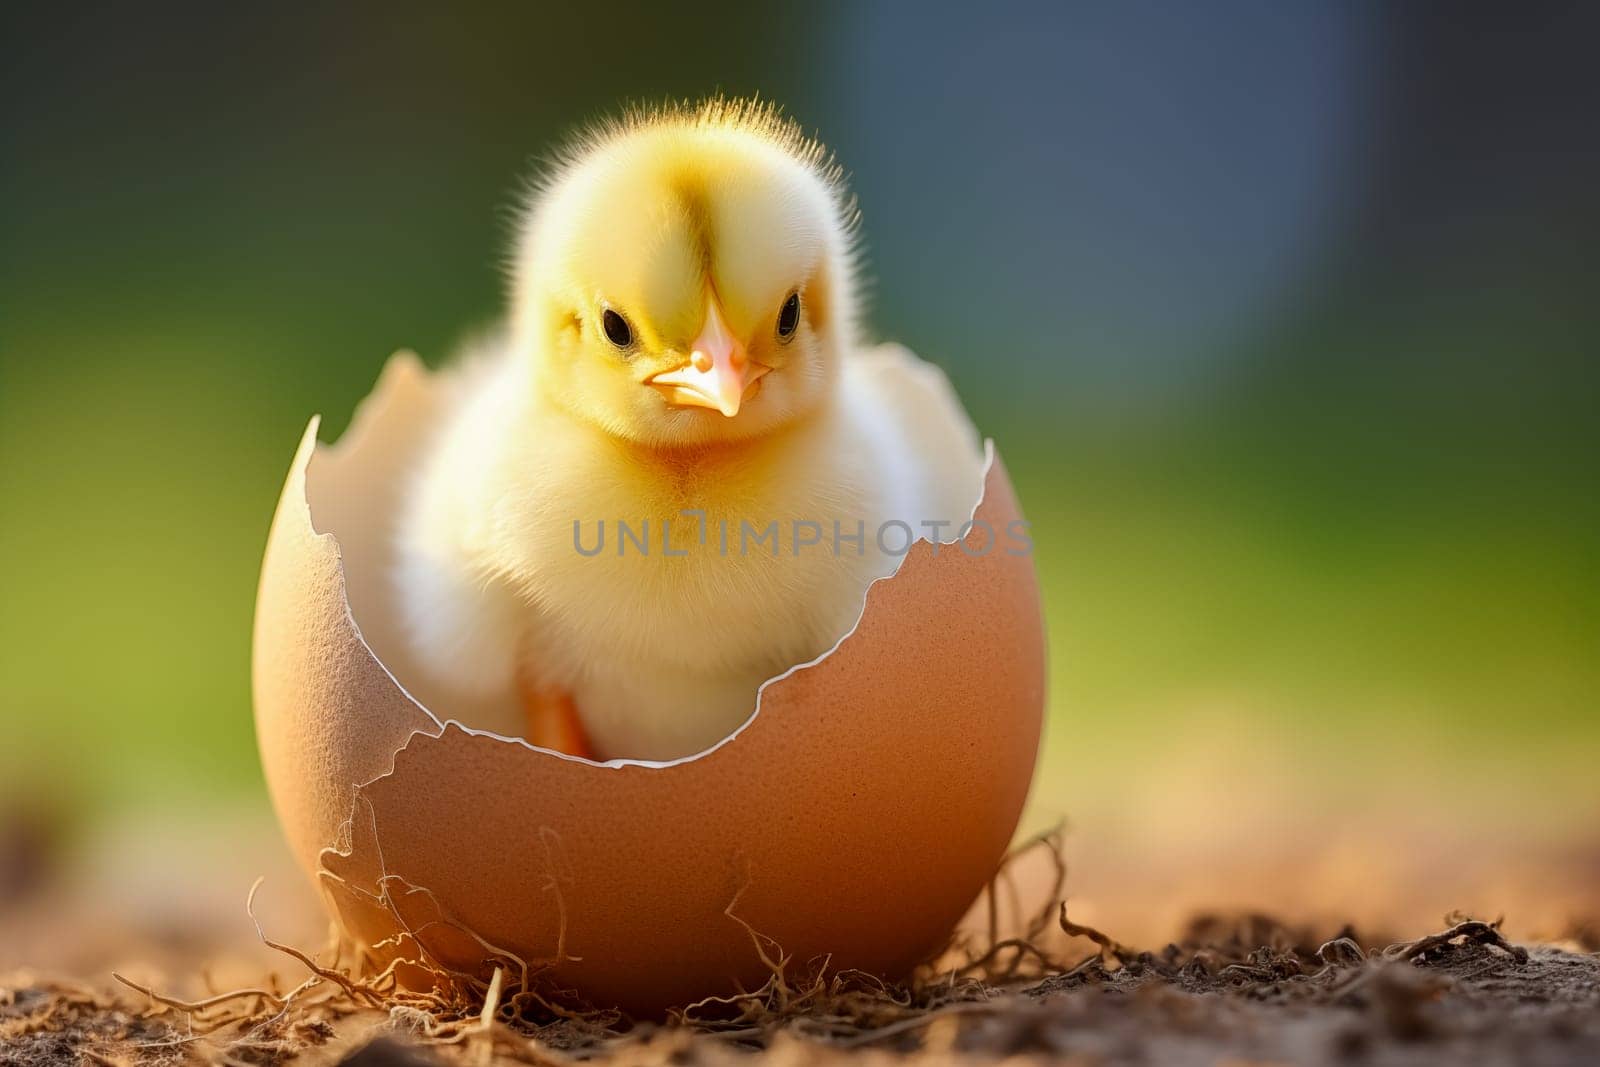 A close-up image capturing the moment a fluffy yellow chick emerges from its egg, showcasing the beauty of new life